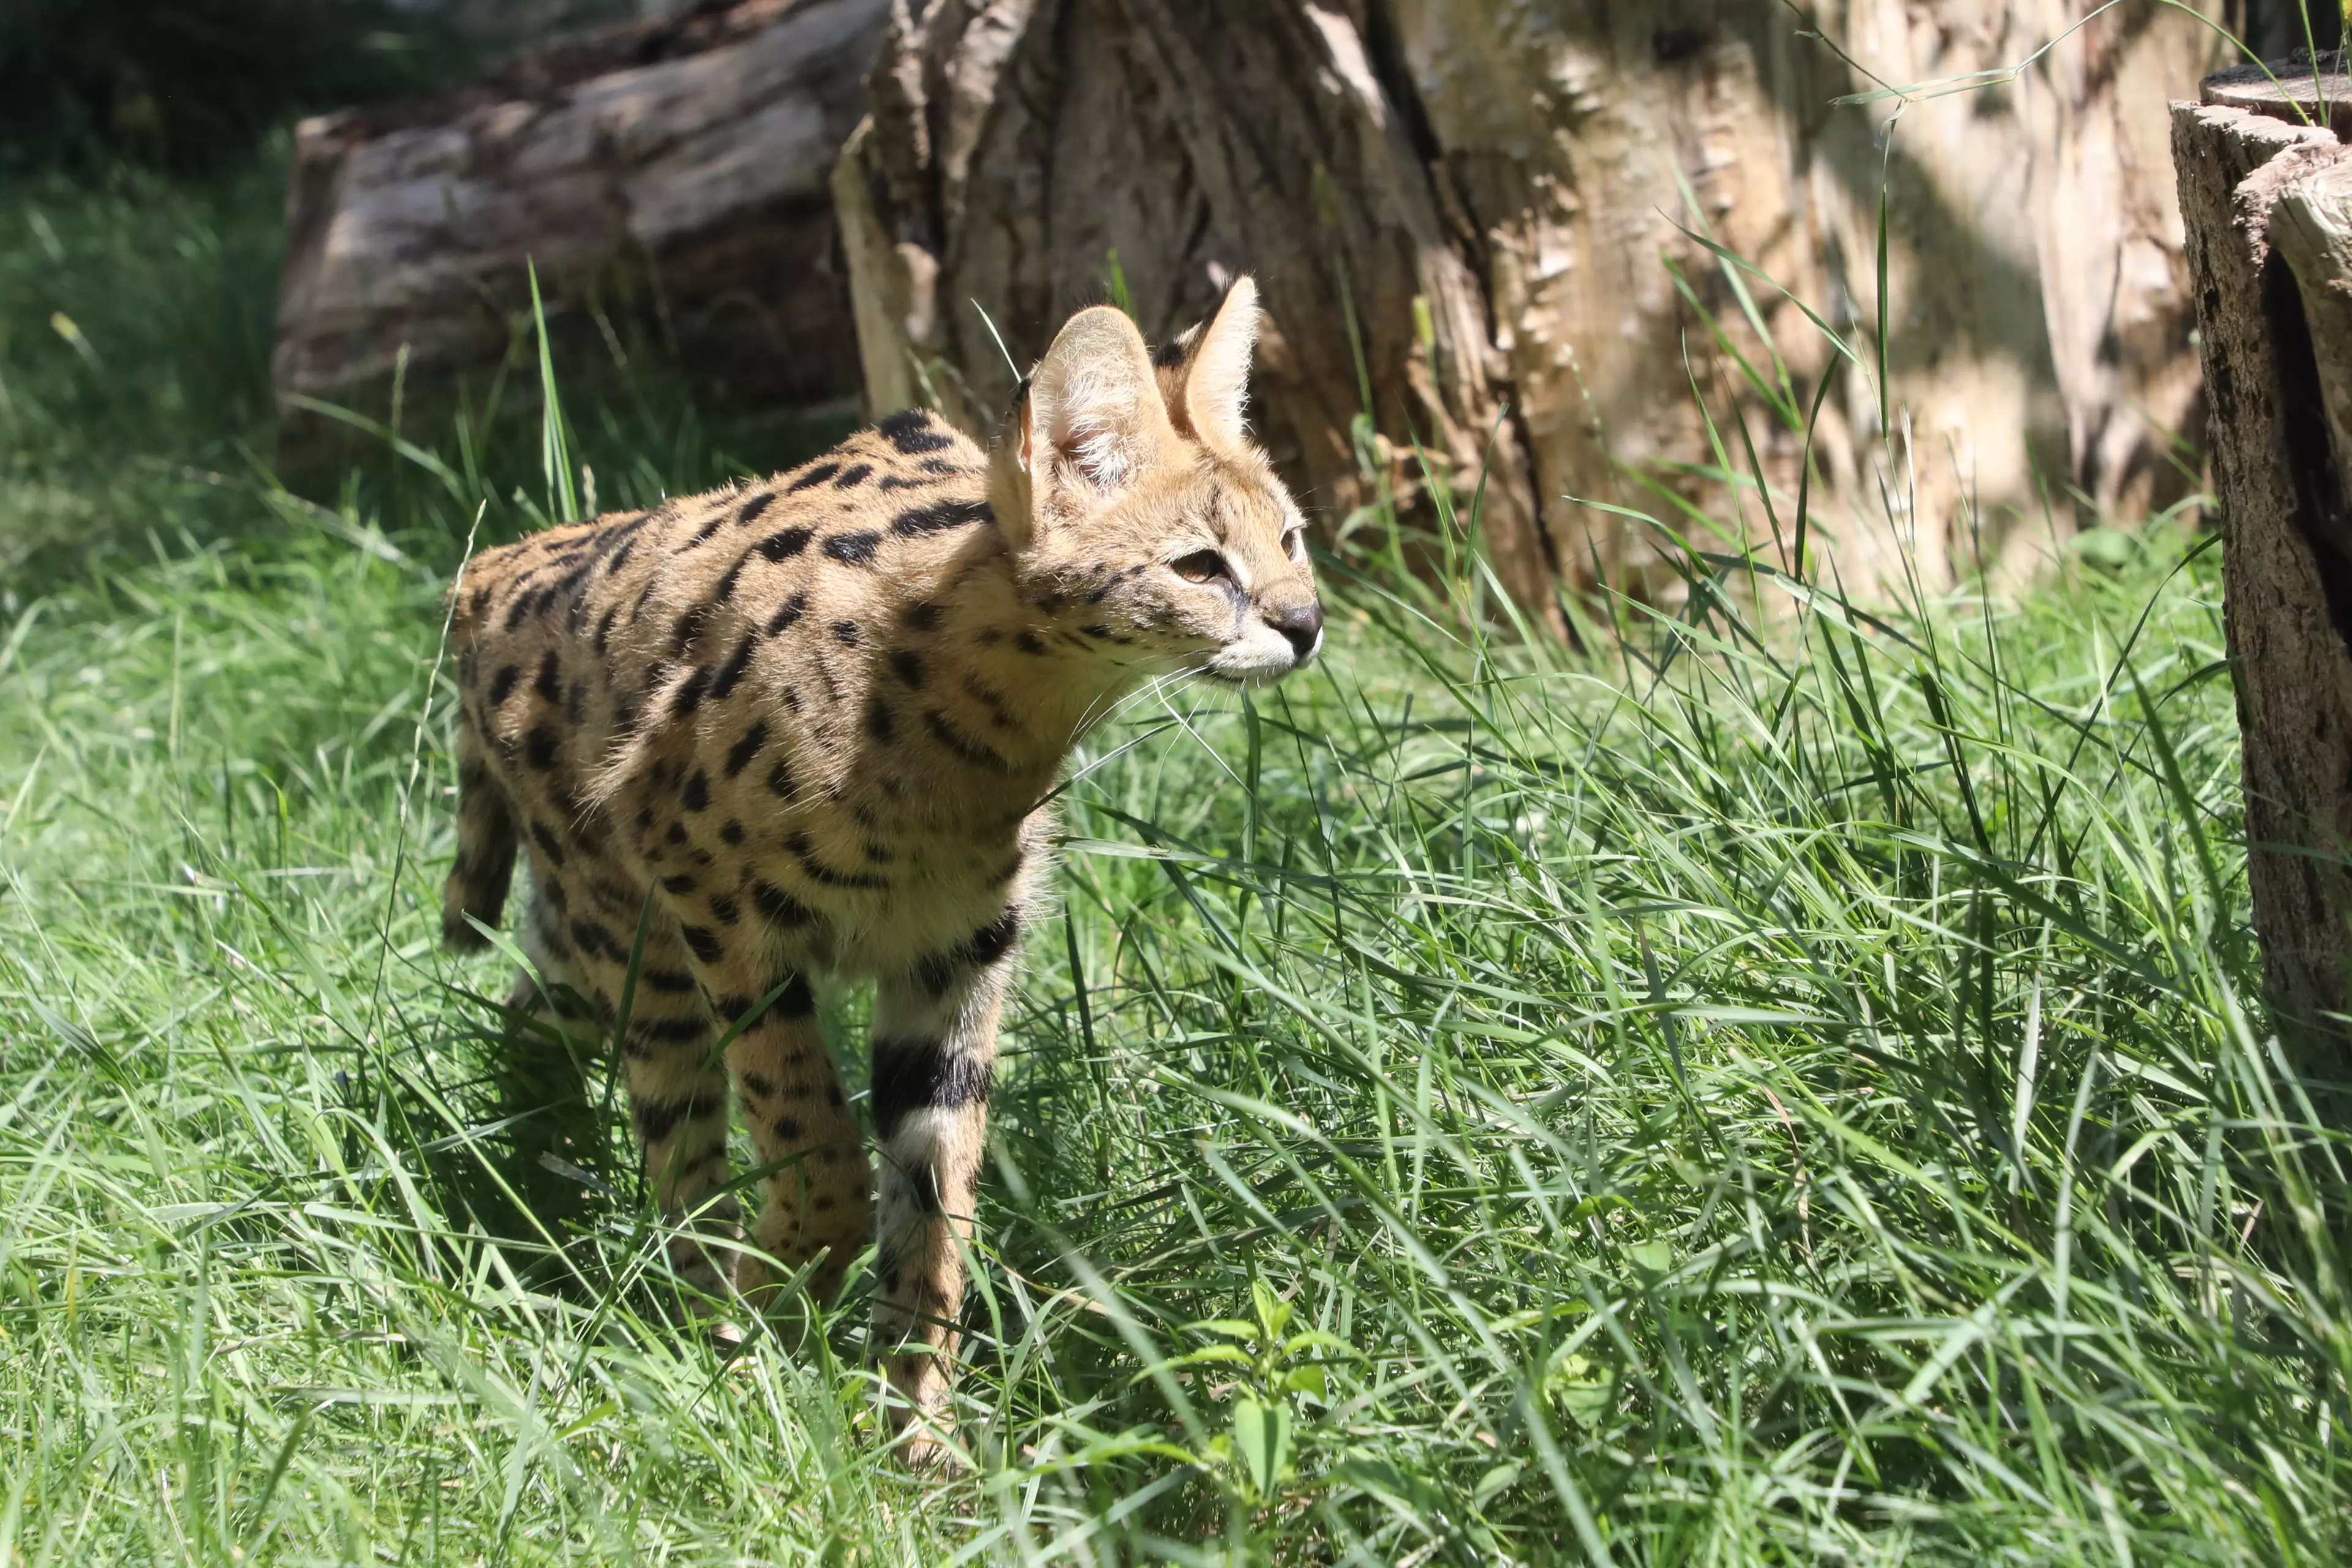 Savannah cats are a cross between a domestic cat and a serval (pictured).